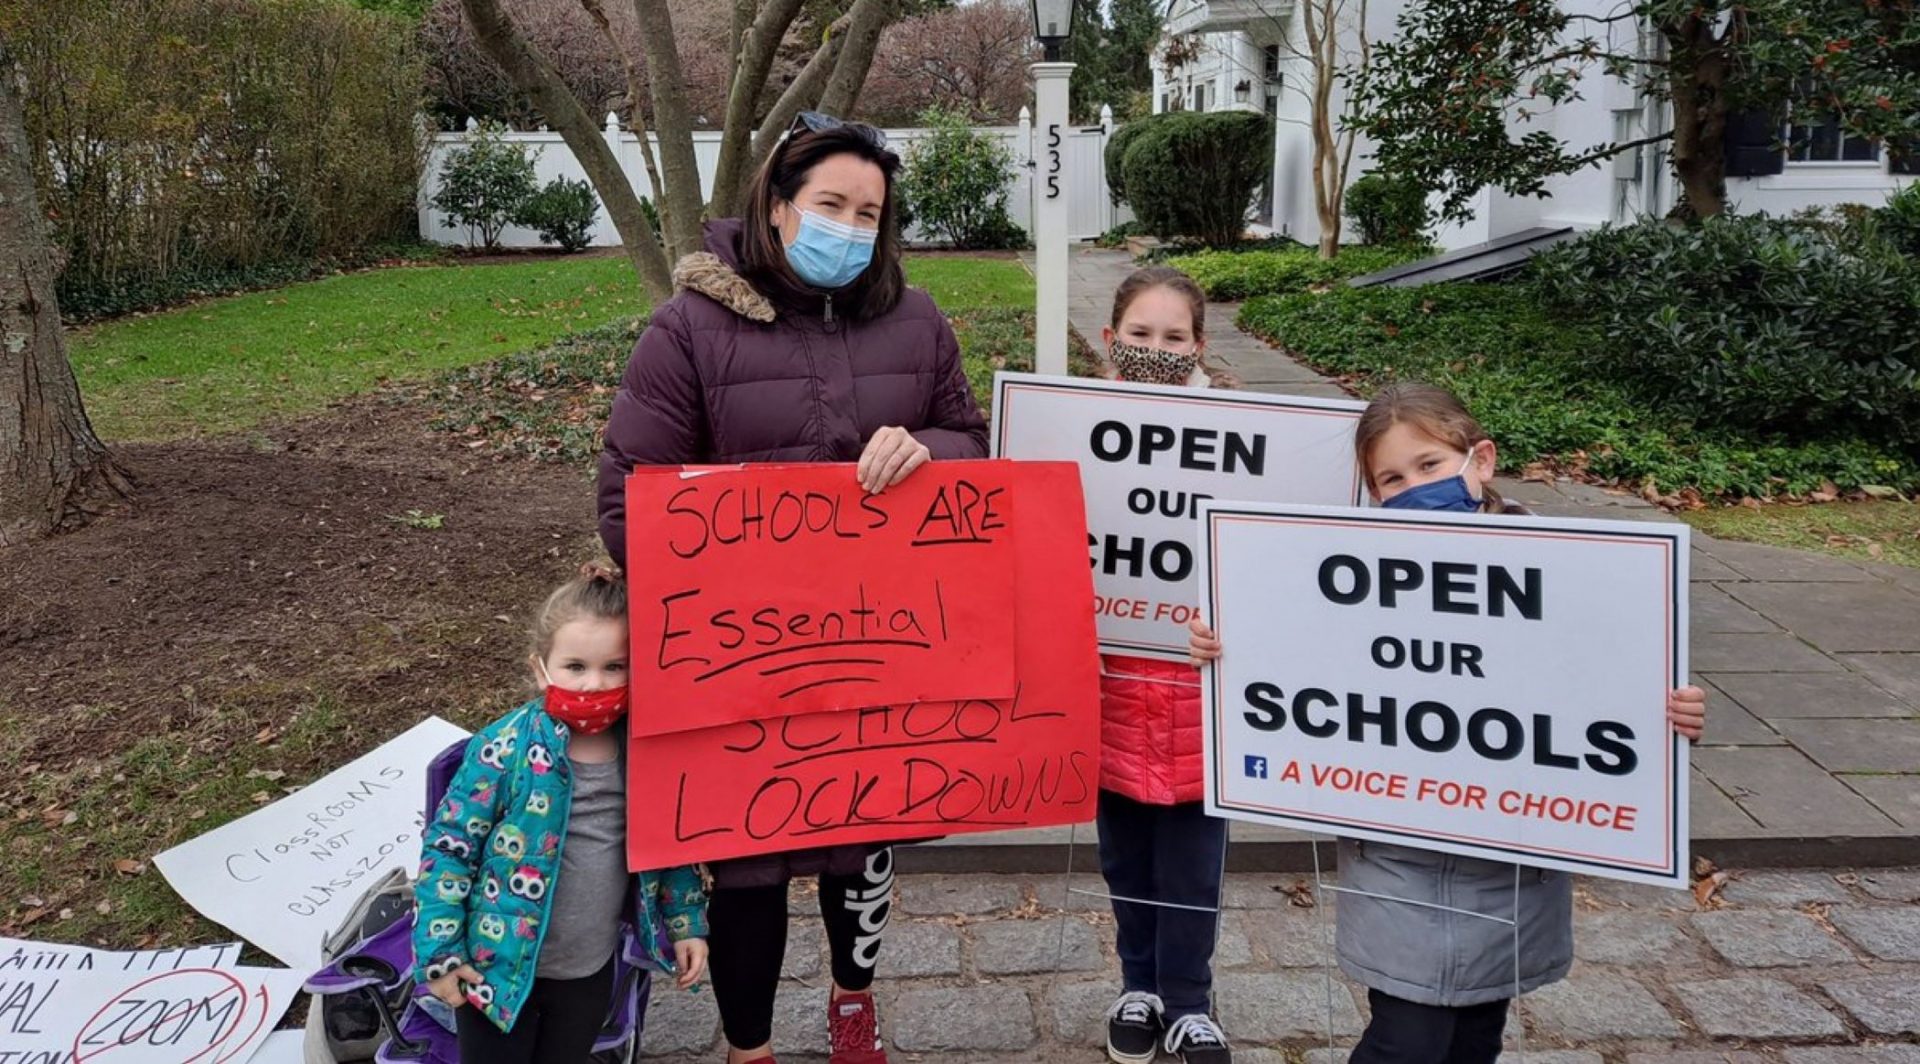 Montgomery County parent Jennifer Singer attended a protest in November 2020 outside the home of Commisioners' Chair Val Arkoosh. Singer and others were in opposition of a two-week shutdown of in-person learning in the county.